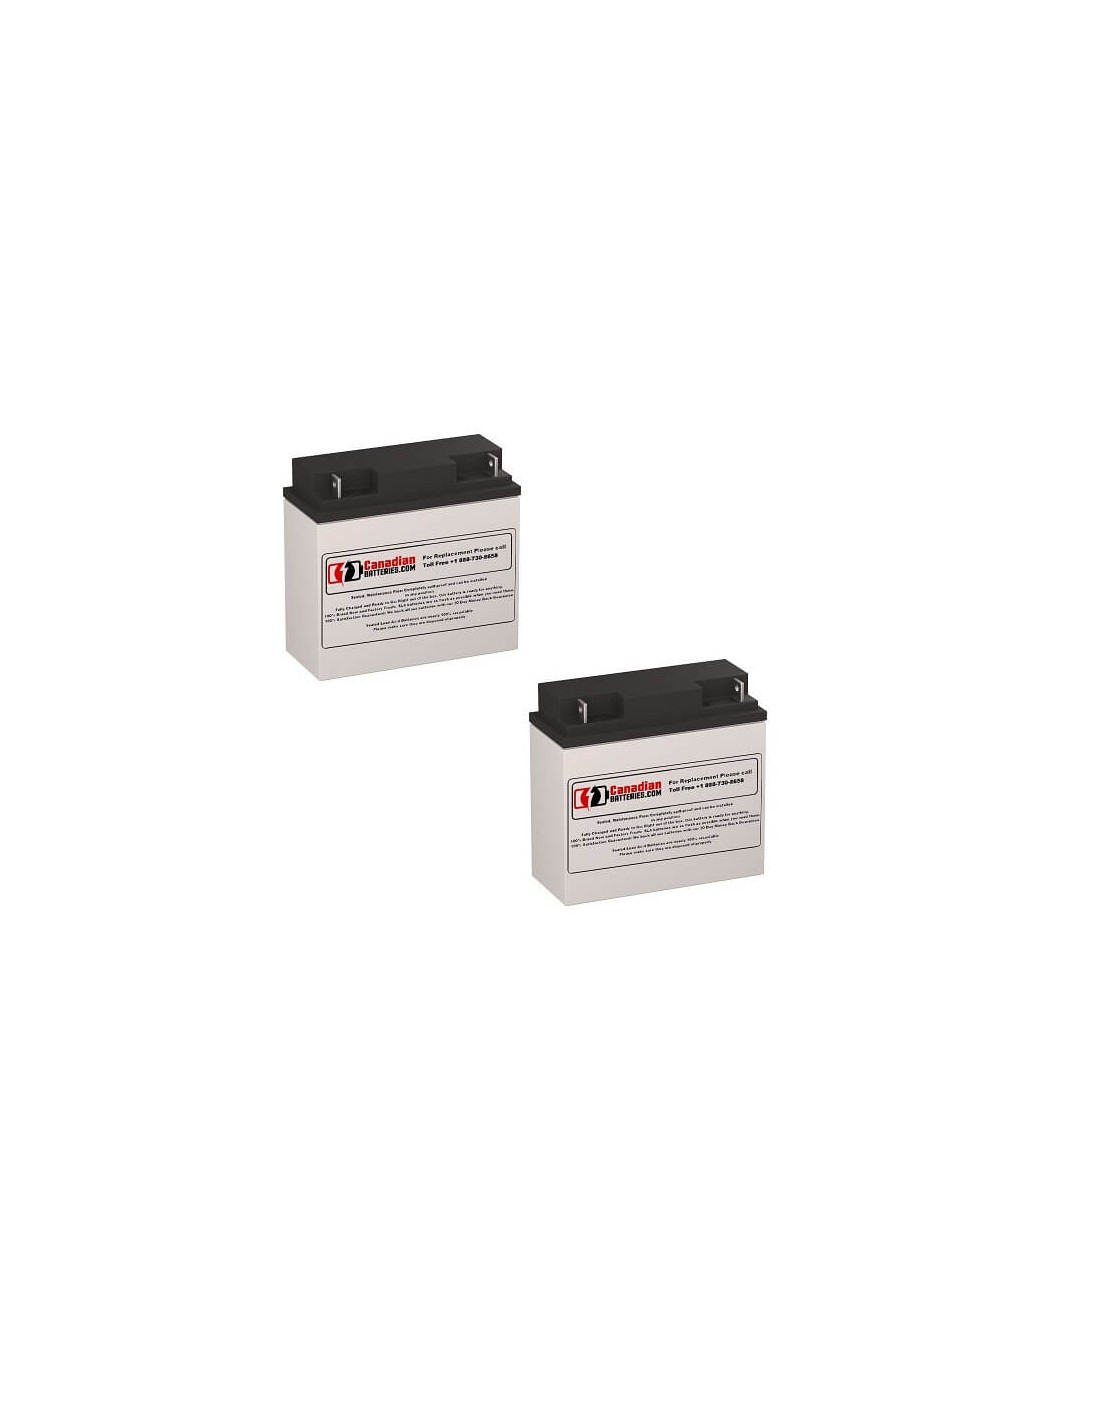 Batteries for Oneac On600x-wl UPS, 2 x 12V, 18Ah - 216Wh